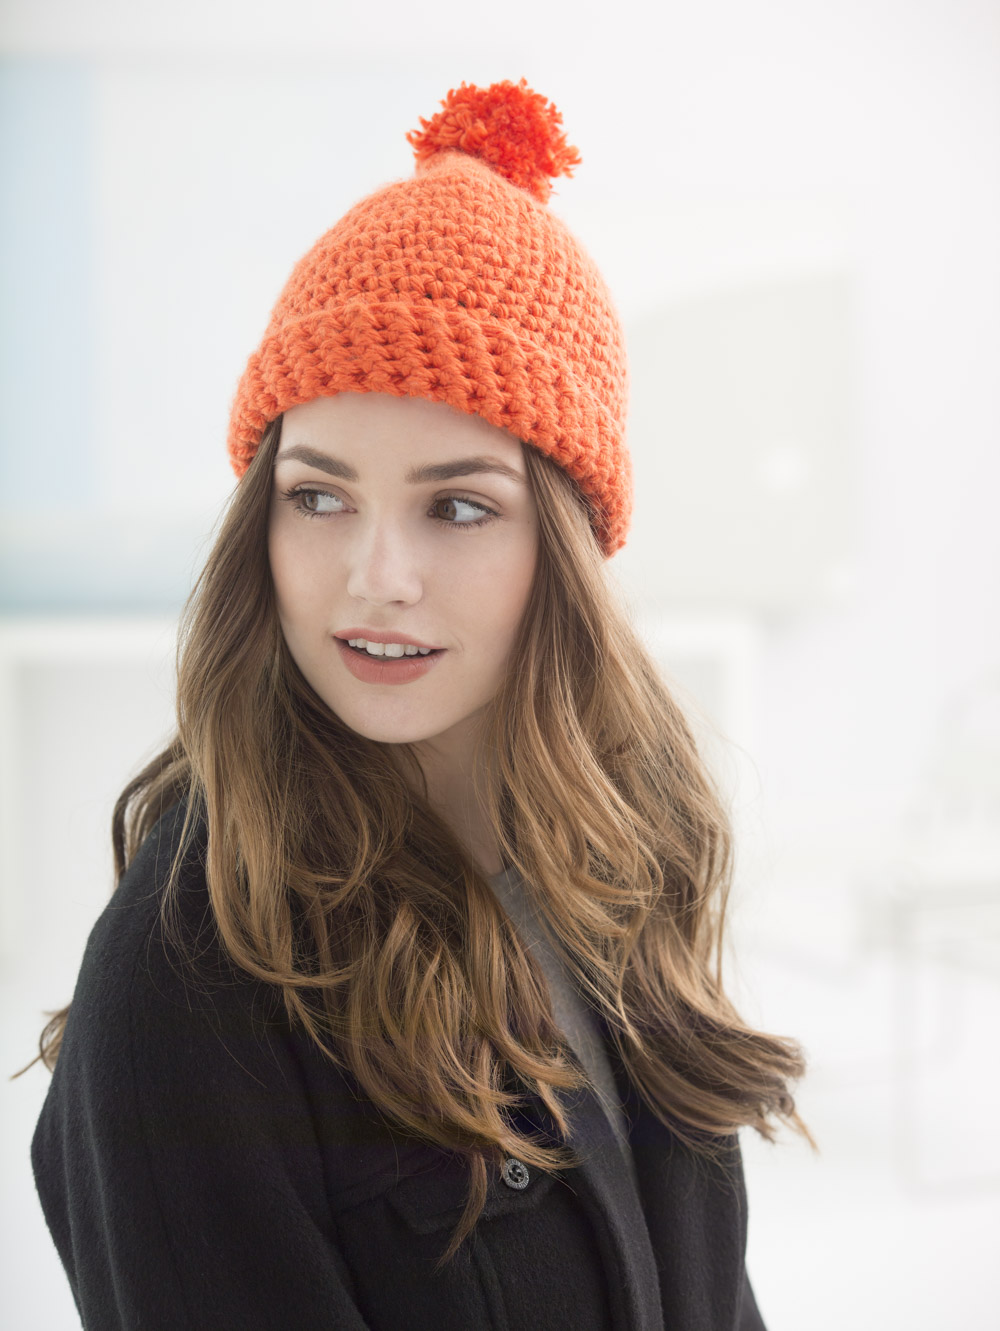 Crochet Home Team Hat with pom pom! in Hometown USA®